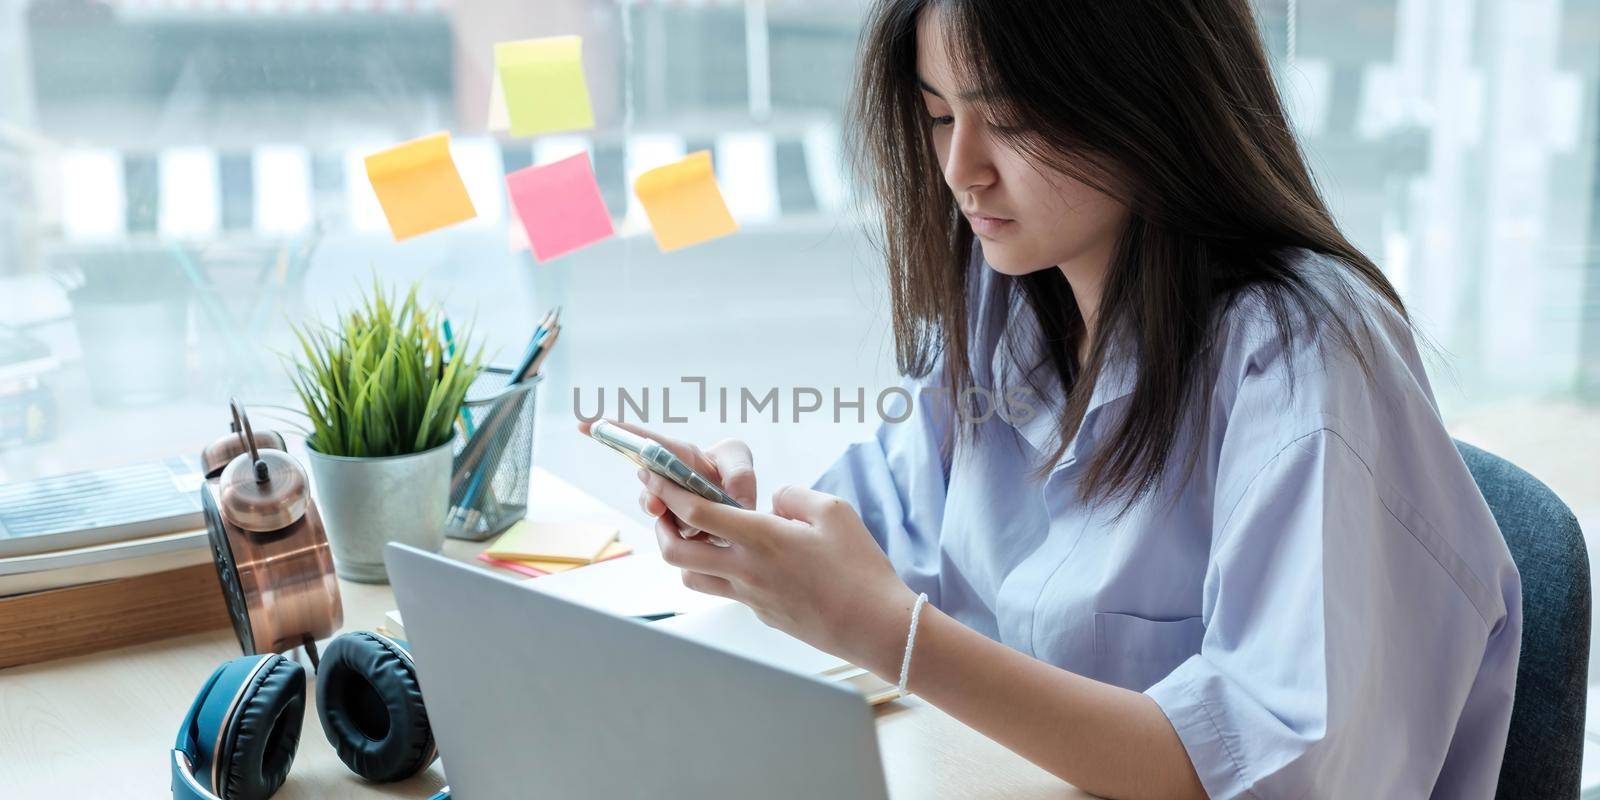 Female student taking notes from a book and using smart phone at home.